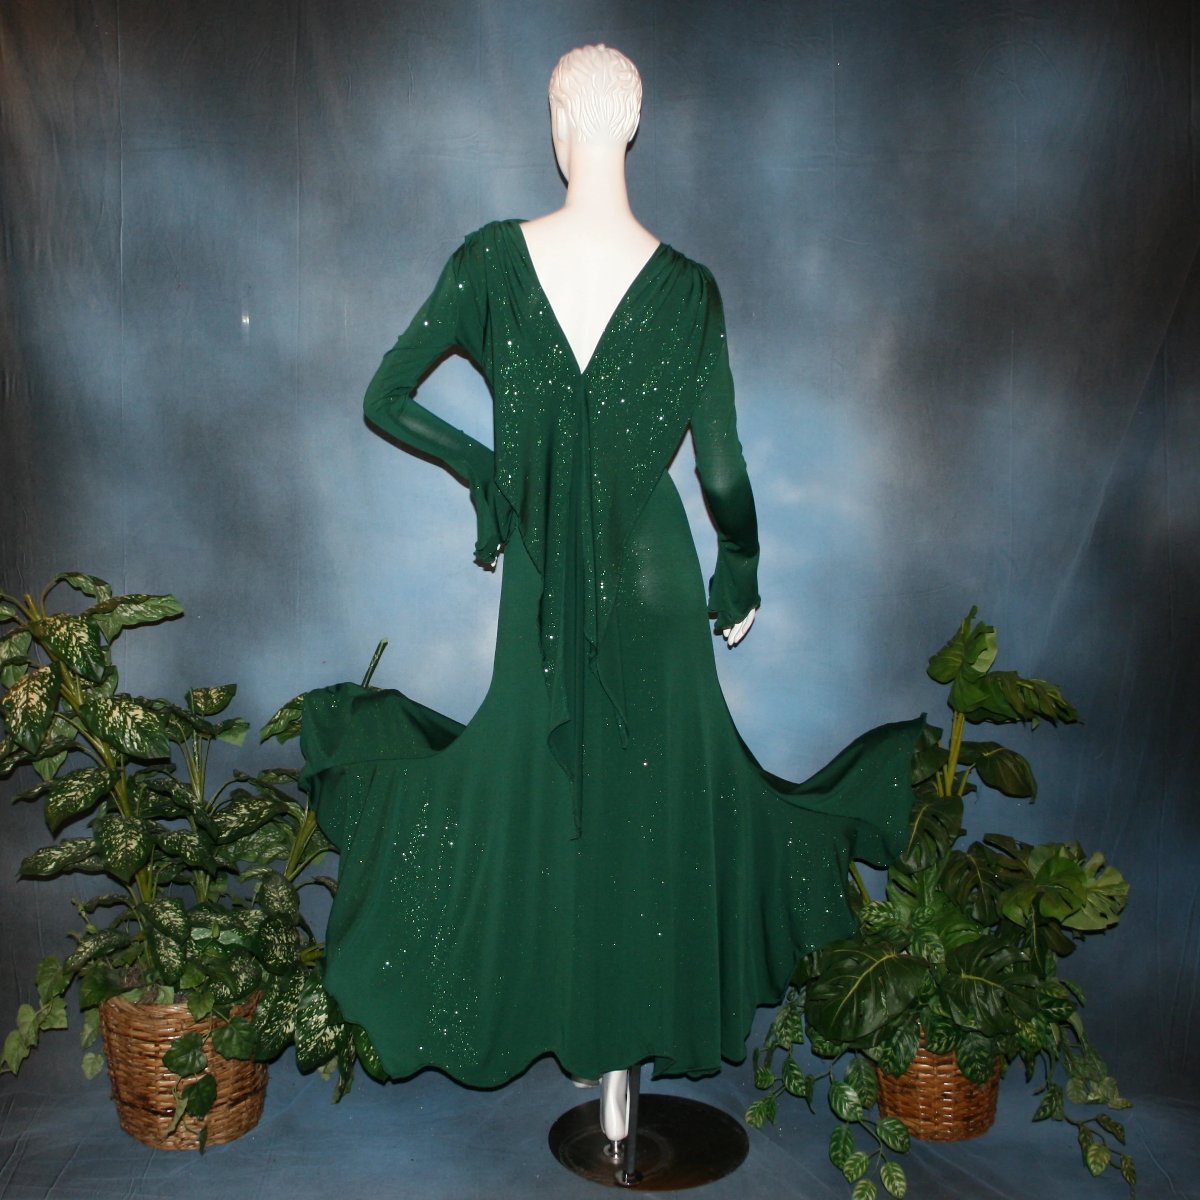 Crystal's Creations back view of Green social ballroom dress was created in luxurious deep emerald glitter slinky, with full  & flaring skirt bottom, long flair sleeves & draping trailing down the back makes this gorgeous dress very elegant & classy!